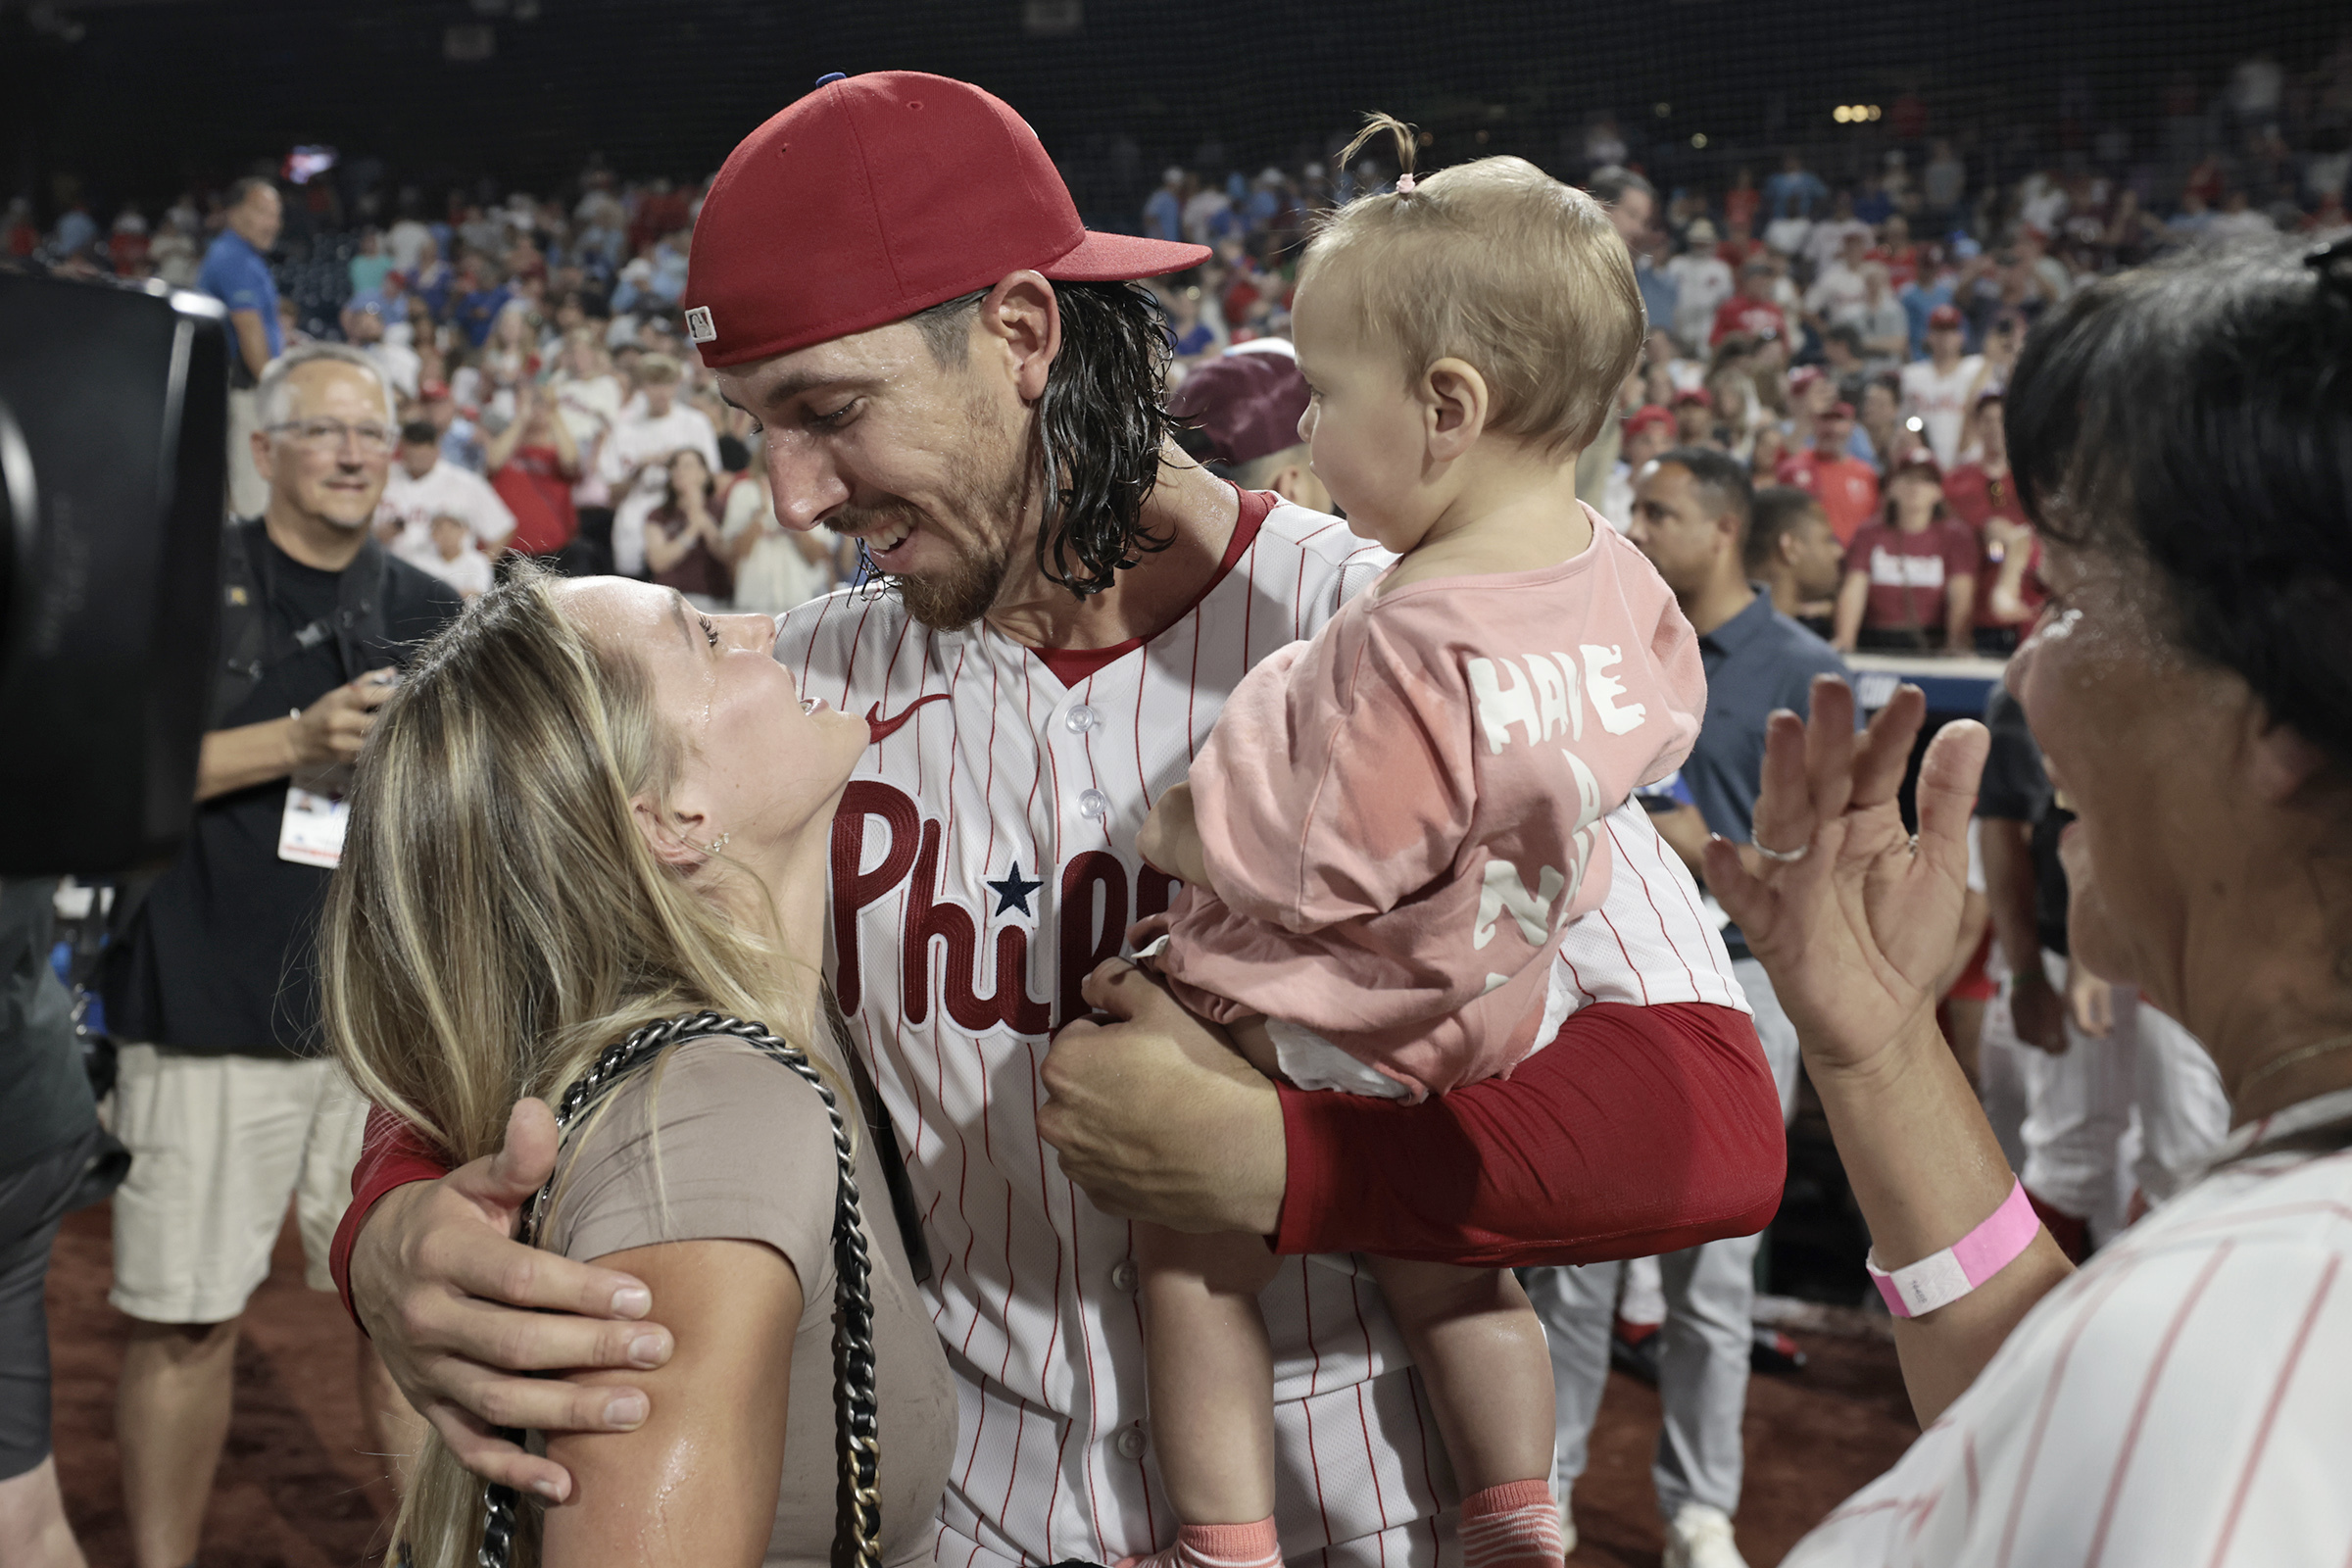 Michael Lorenzen made the Phillies, the city, and his mother proud with his  no-hitter